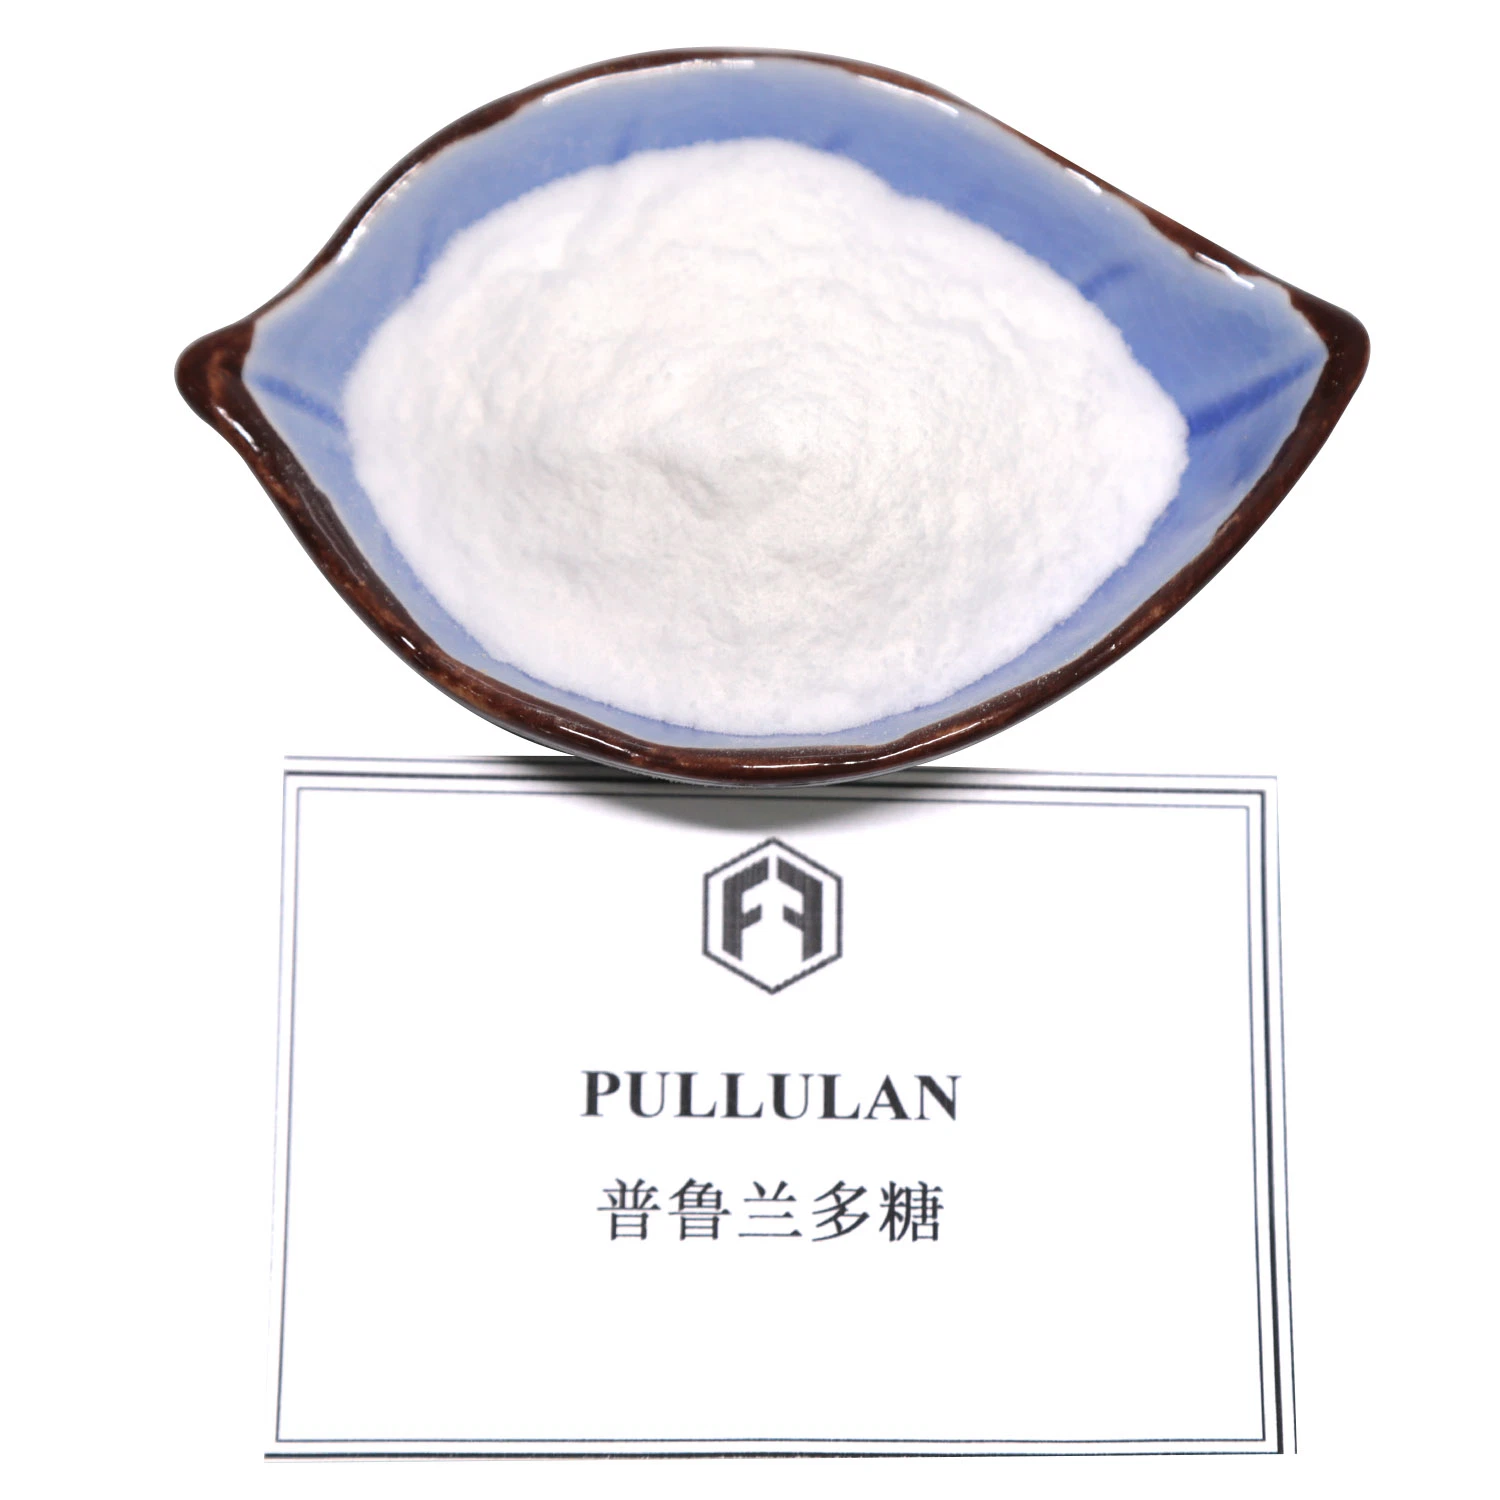 Pullulan Is Widely Used in Food, Light Industry, Chemical Industry and Petroleum and Other Fields.